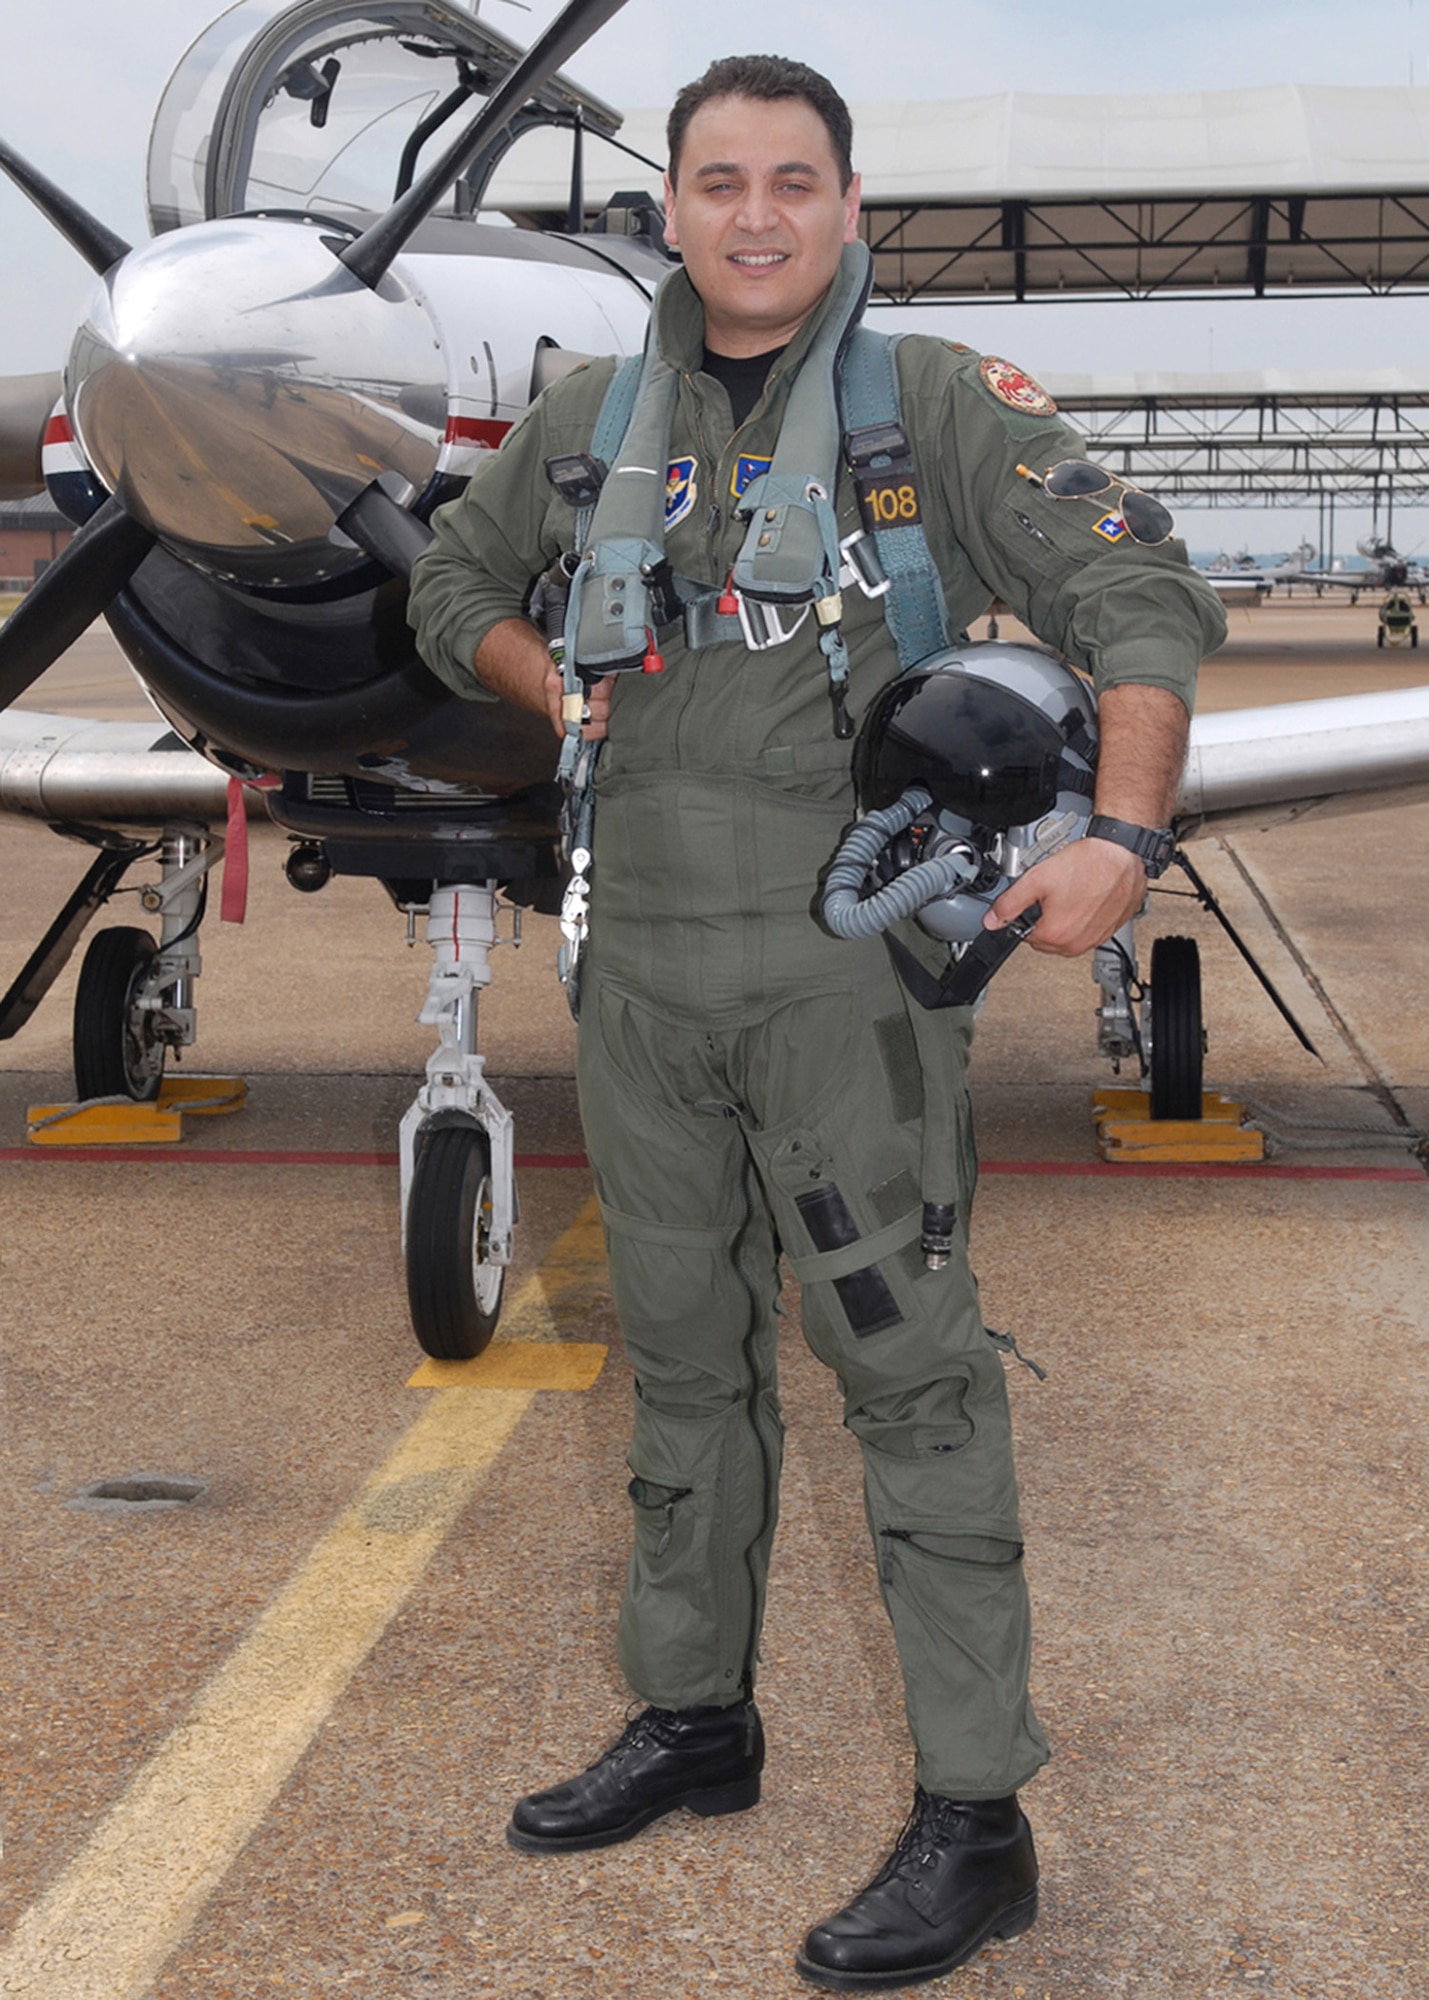 Iraqi air force 2nd Lt. Omar AlNuaimi graduated alongside his fellow student pilots in Specialized Undergraduate Pilot Training Class 09-12 July 24 at Columbus Air Force Base, Miss. (U.S. Air Force photo) 